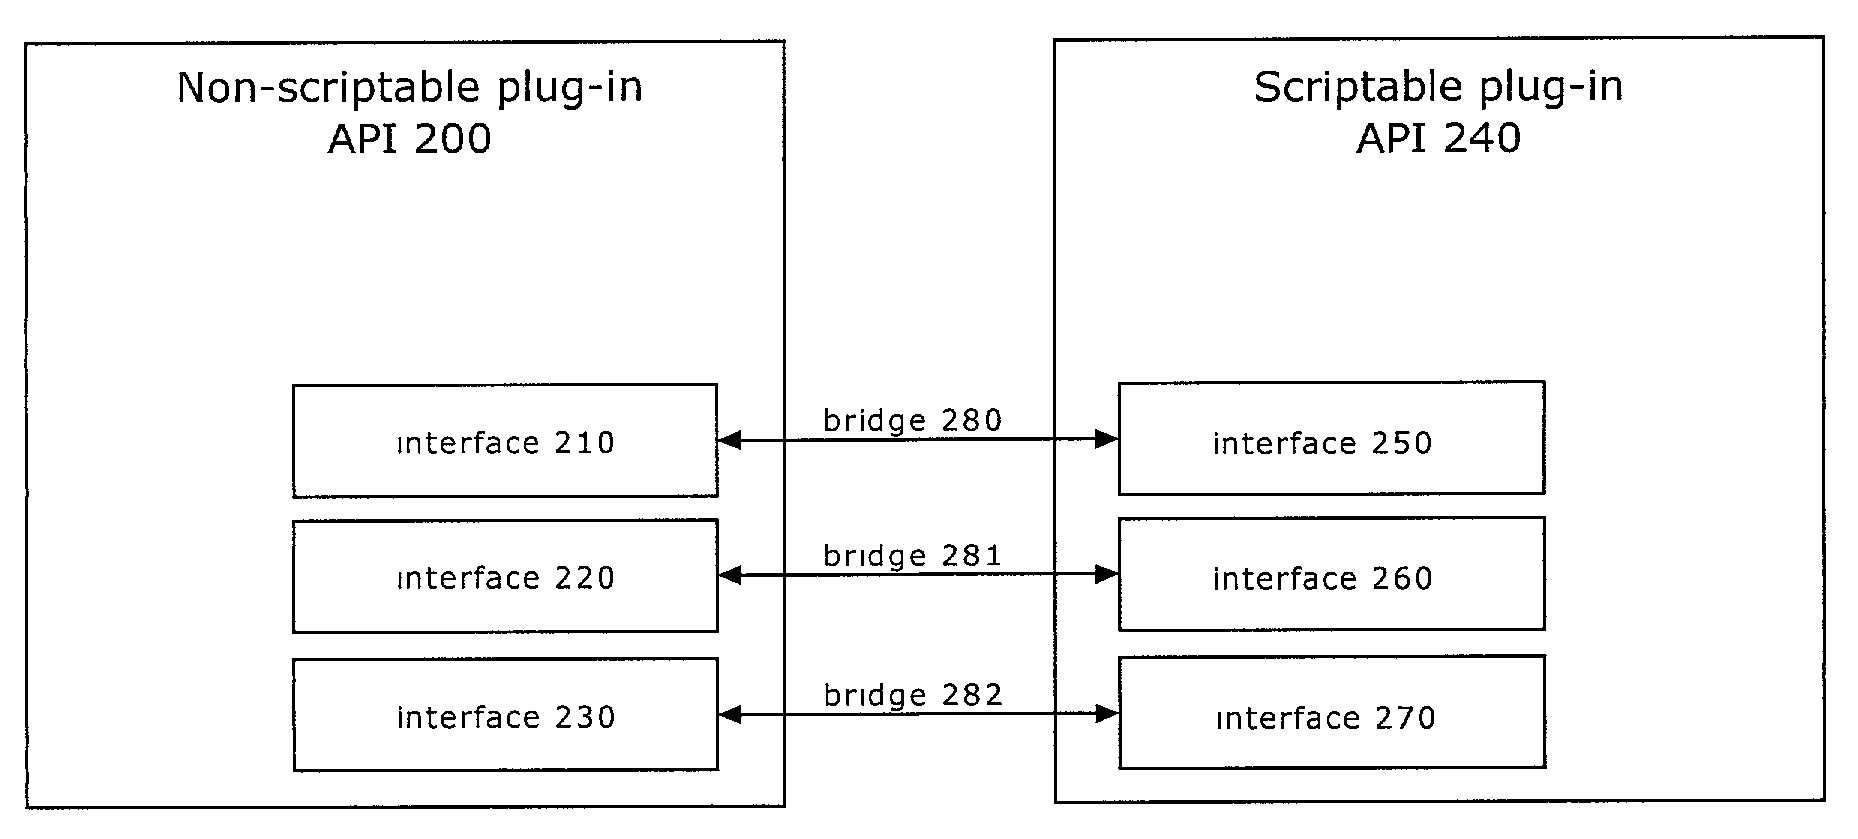 Scriptable plug-in application programming interface